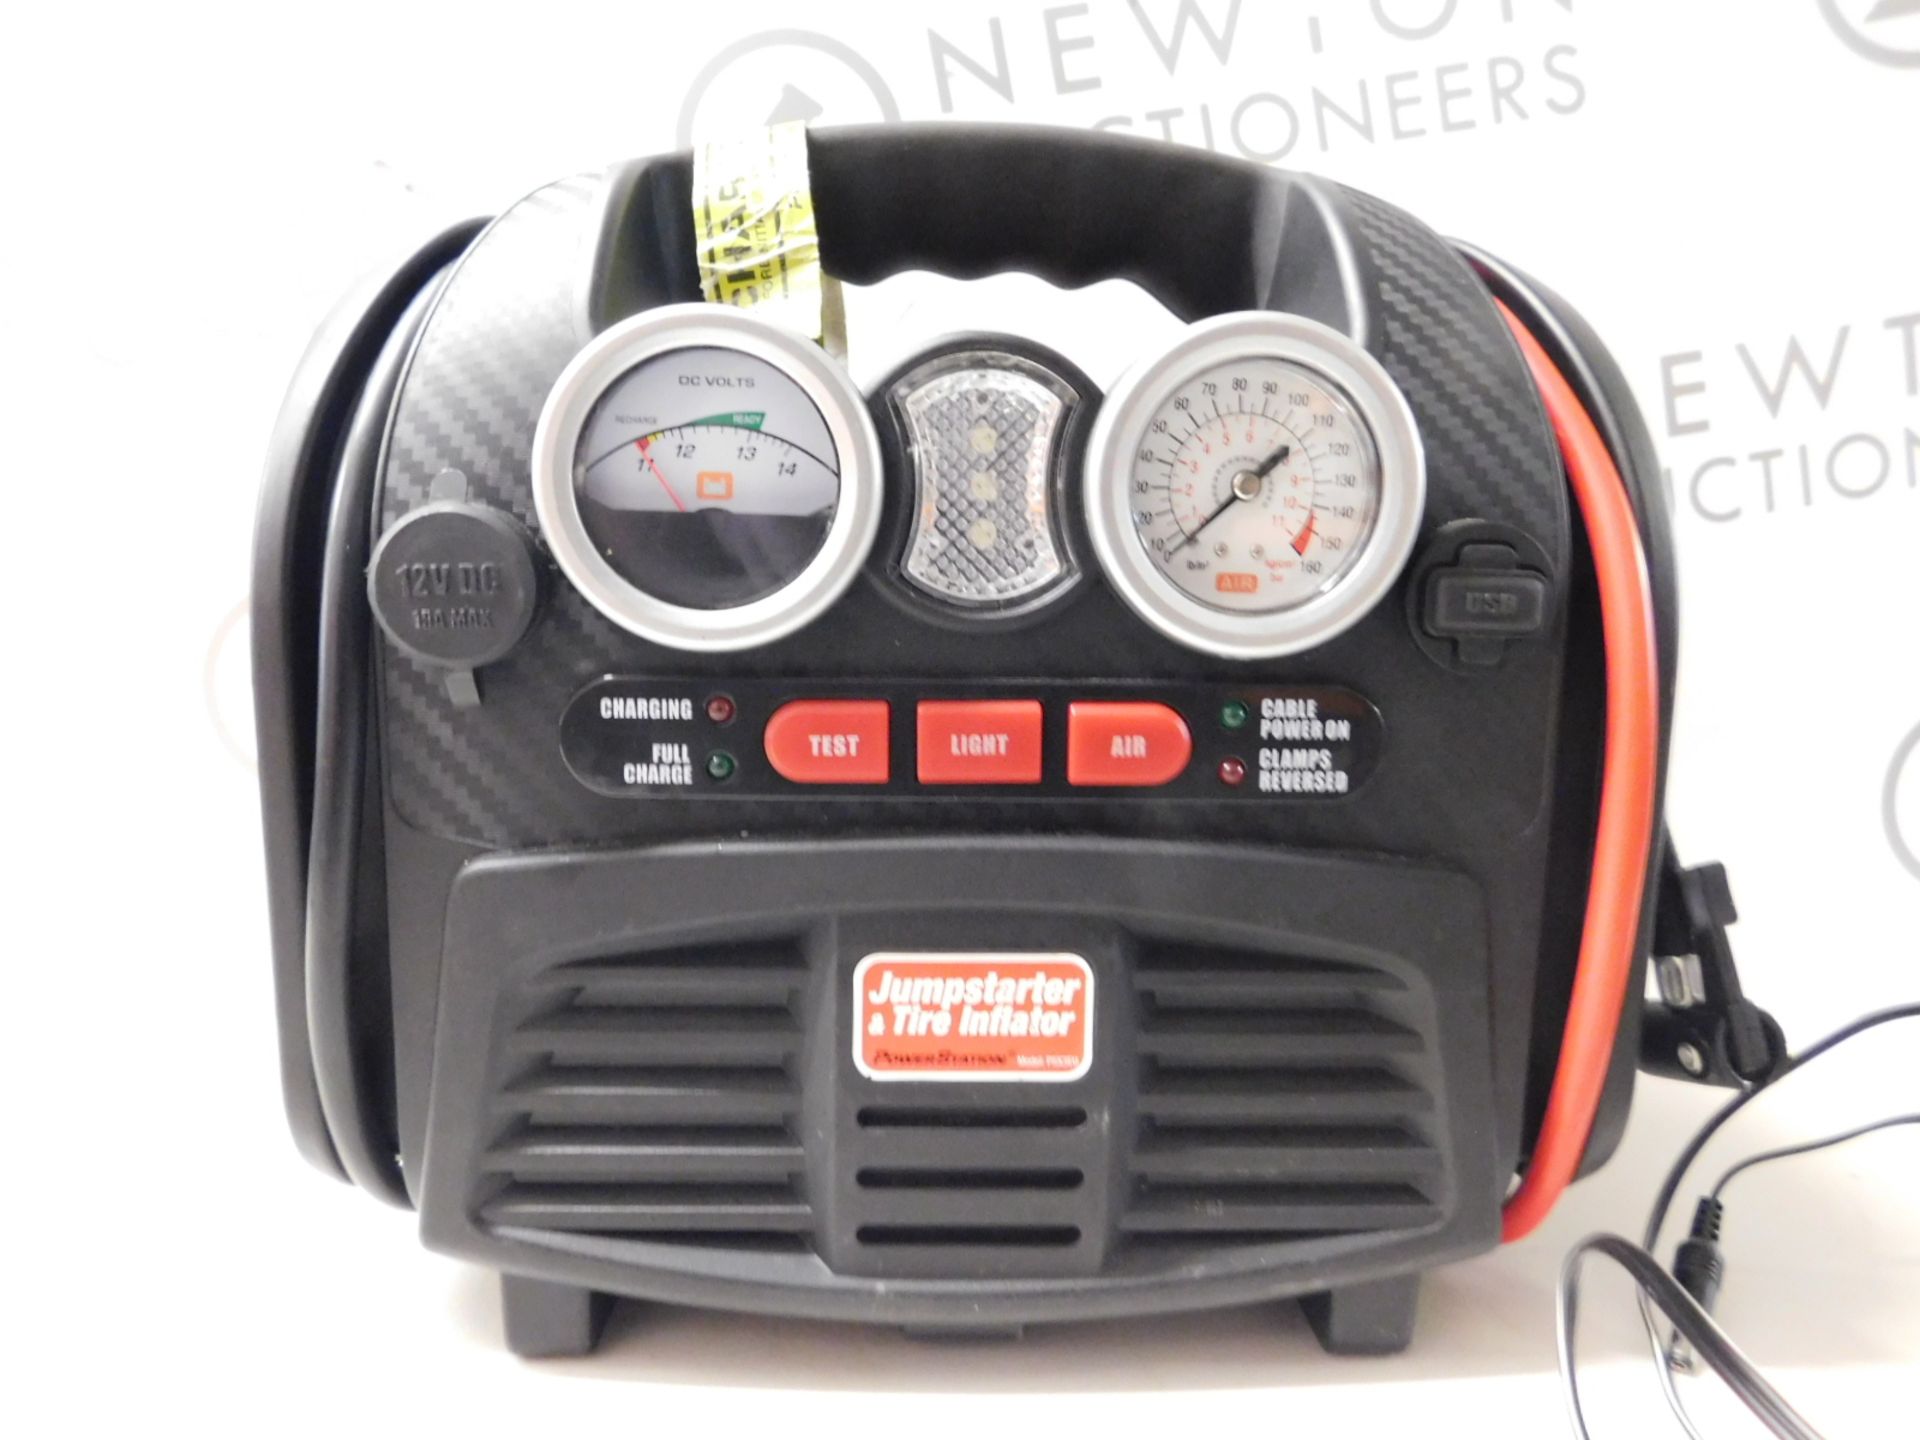 1 POWERSTATION PSX3 BATTERY JUMPSTARTER WITH BUILT IN LIGHT AND COMPRESSOR RRP £129.99